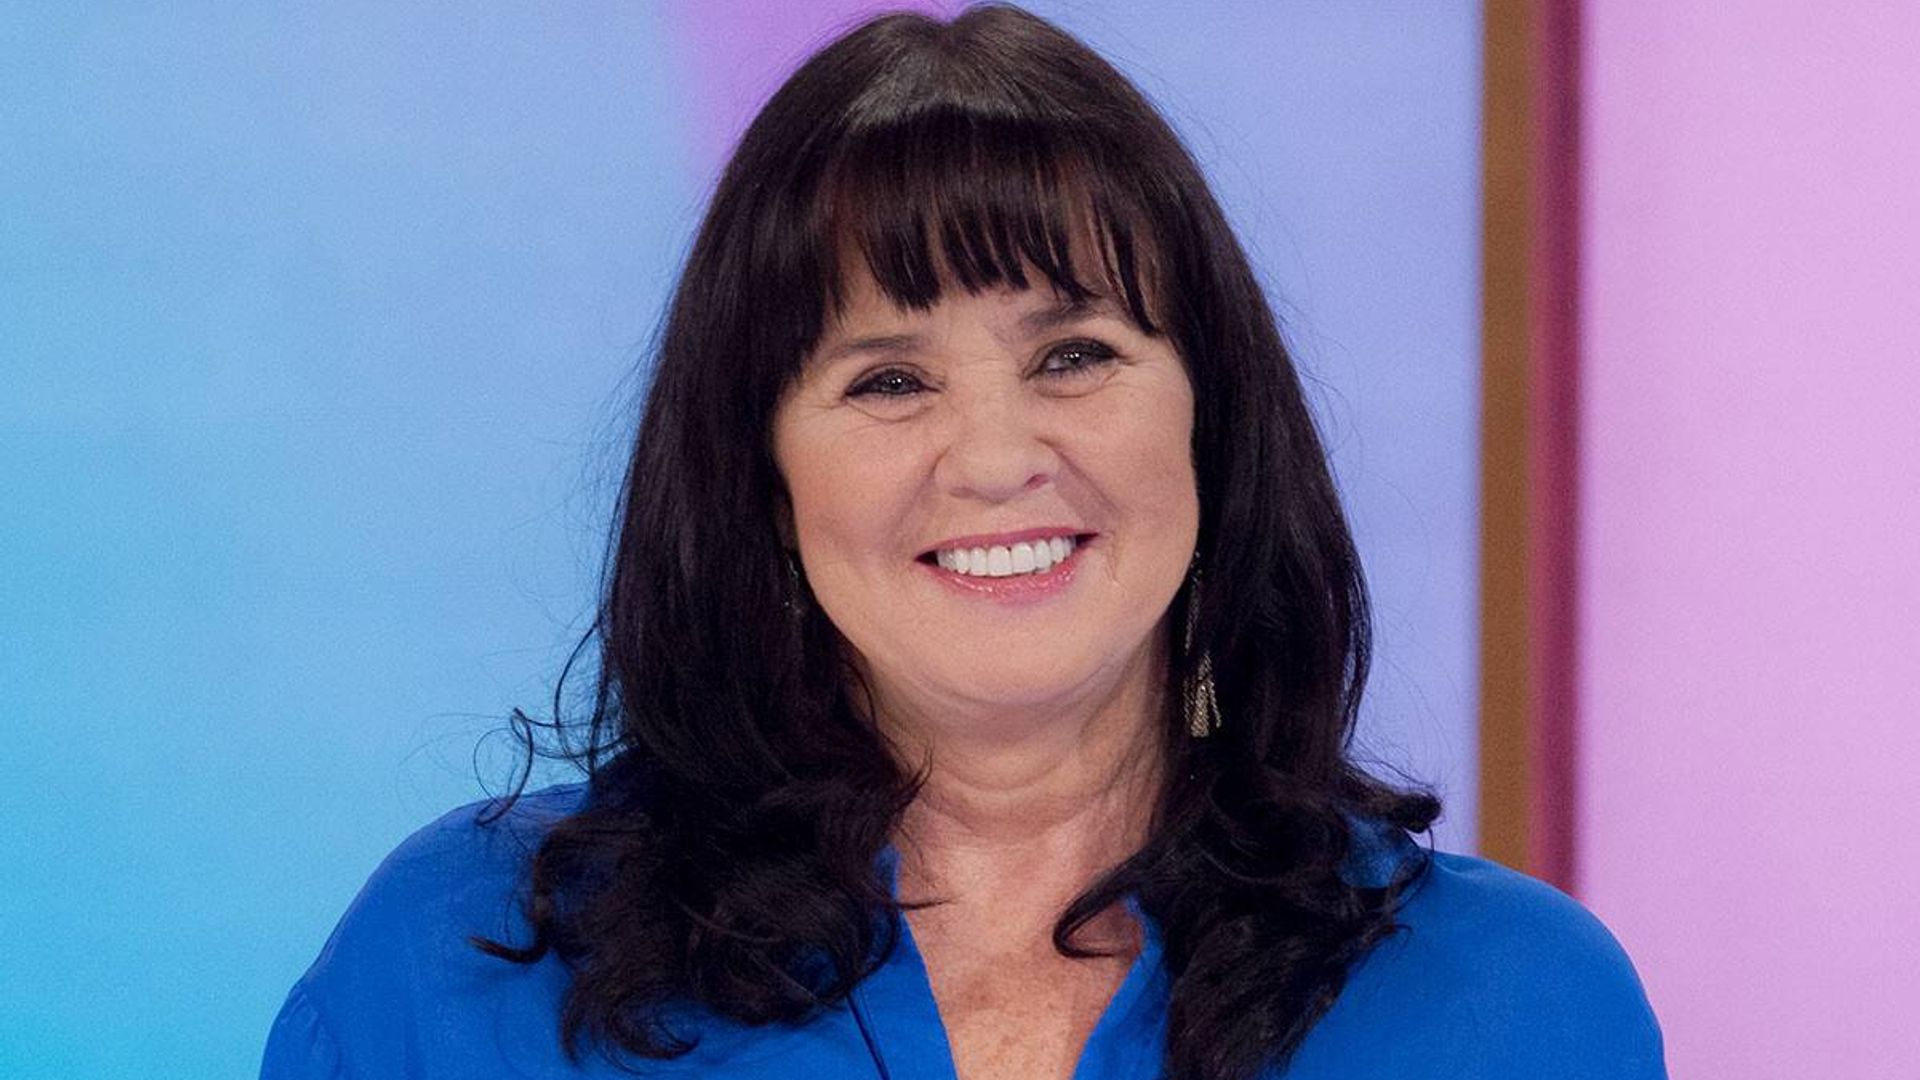 Coleen Nolan shows off unexpected new look in hilarious video